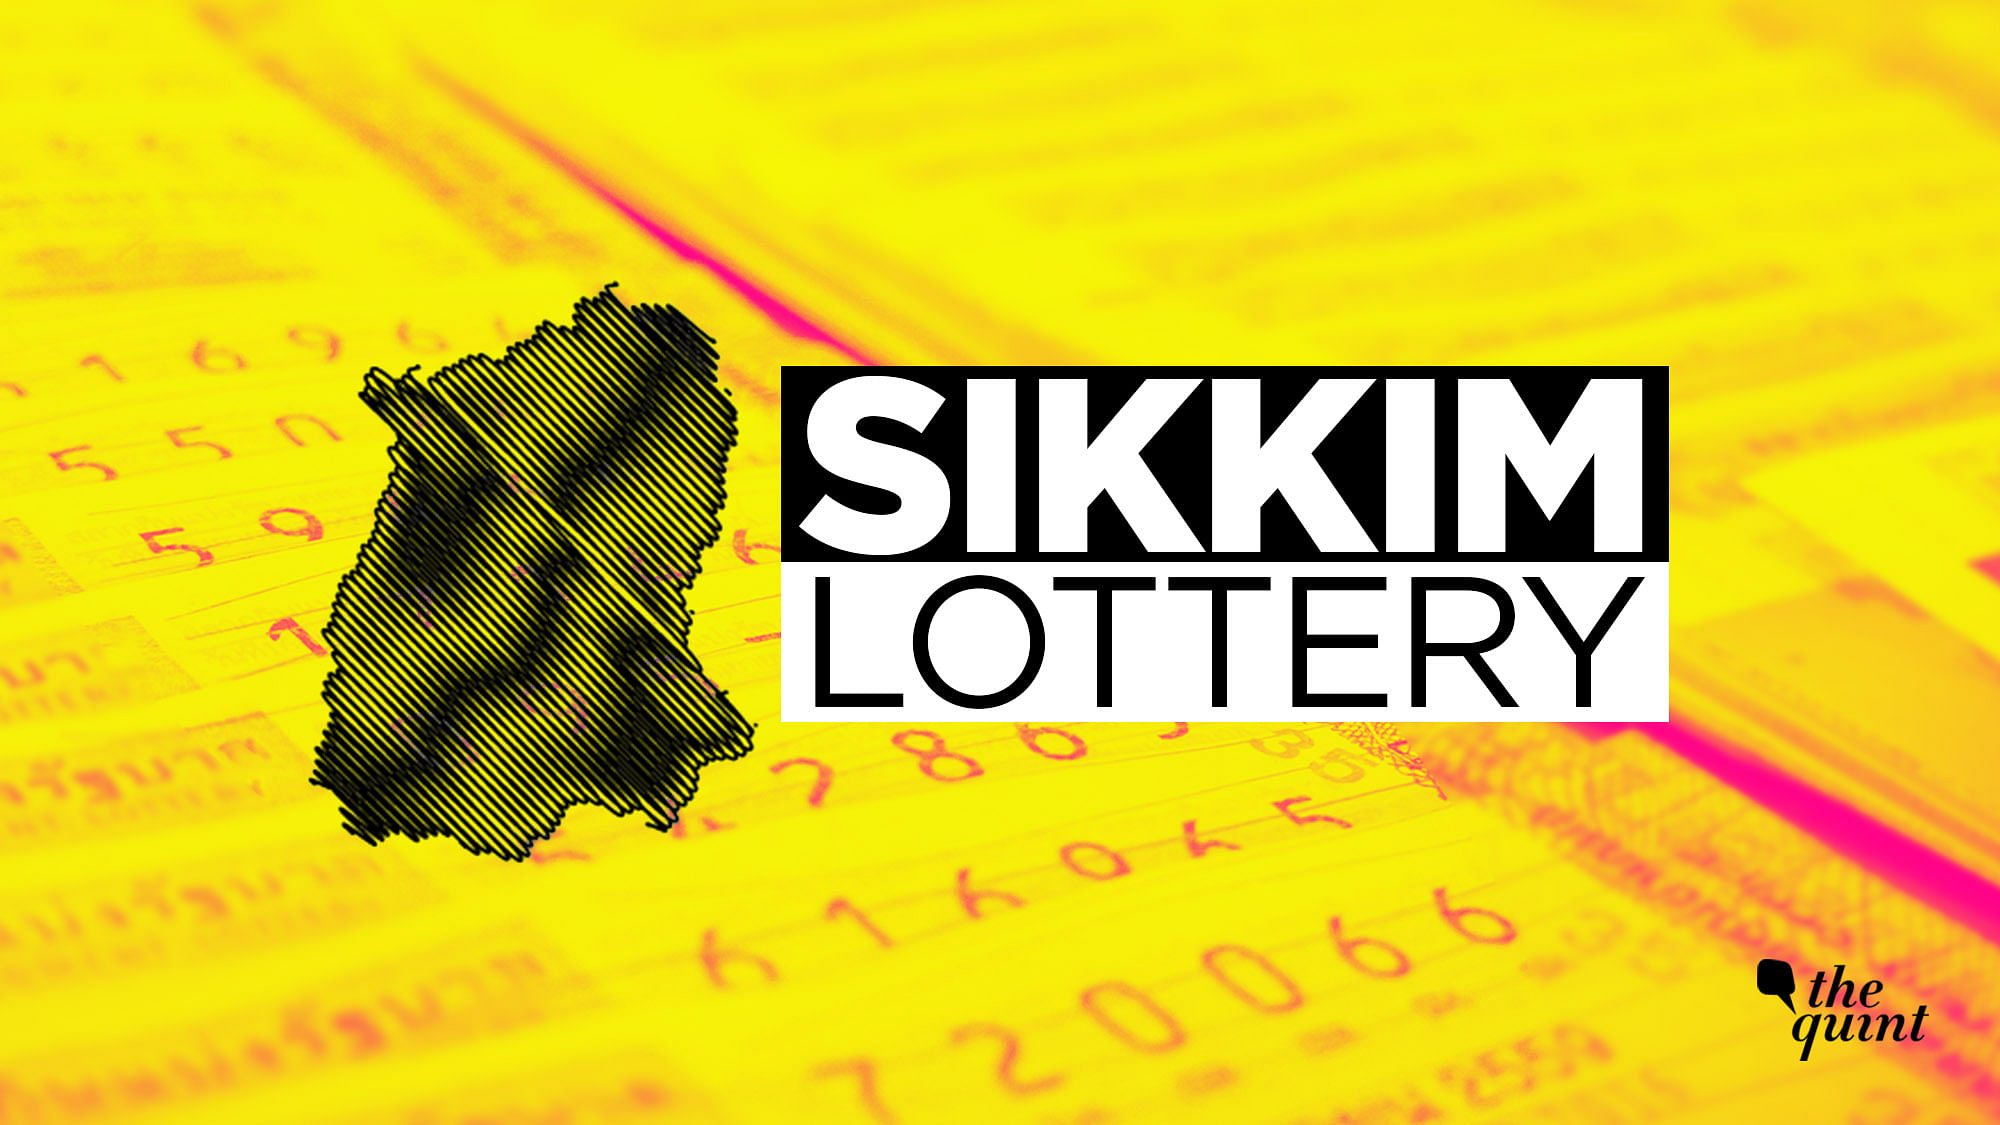 The results of the Sikkim state lottery has been announced at 11:55 am on the official website <a href="http://www.sikkimlotteries.com/">sikkimlotteries.com</a>.